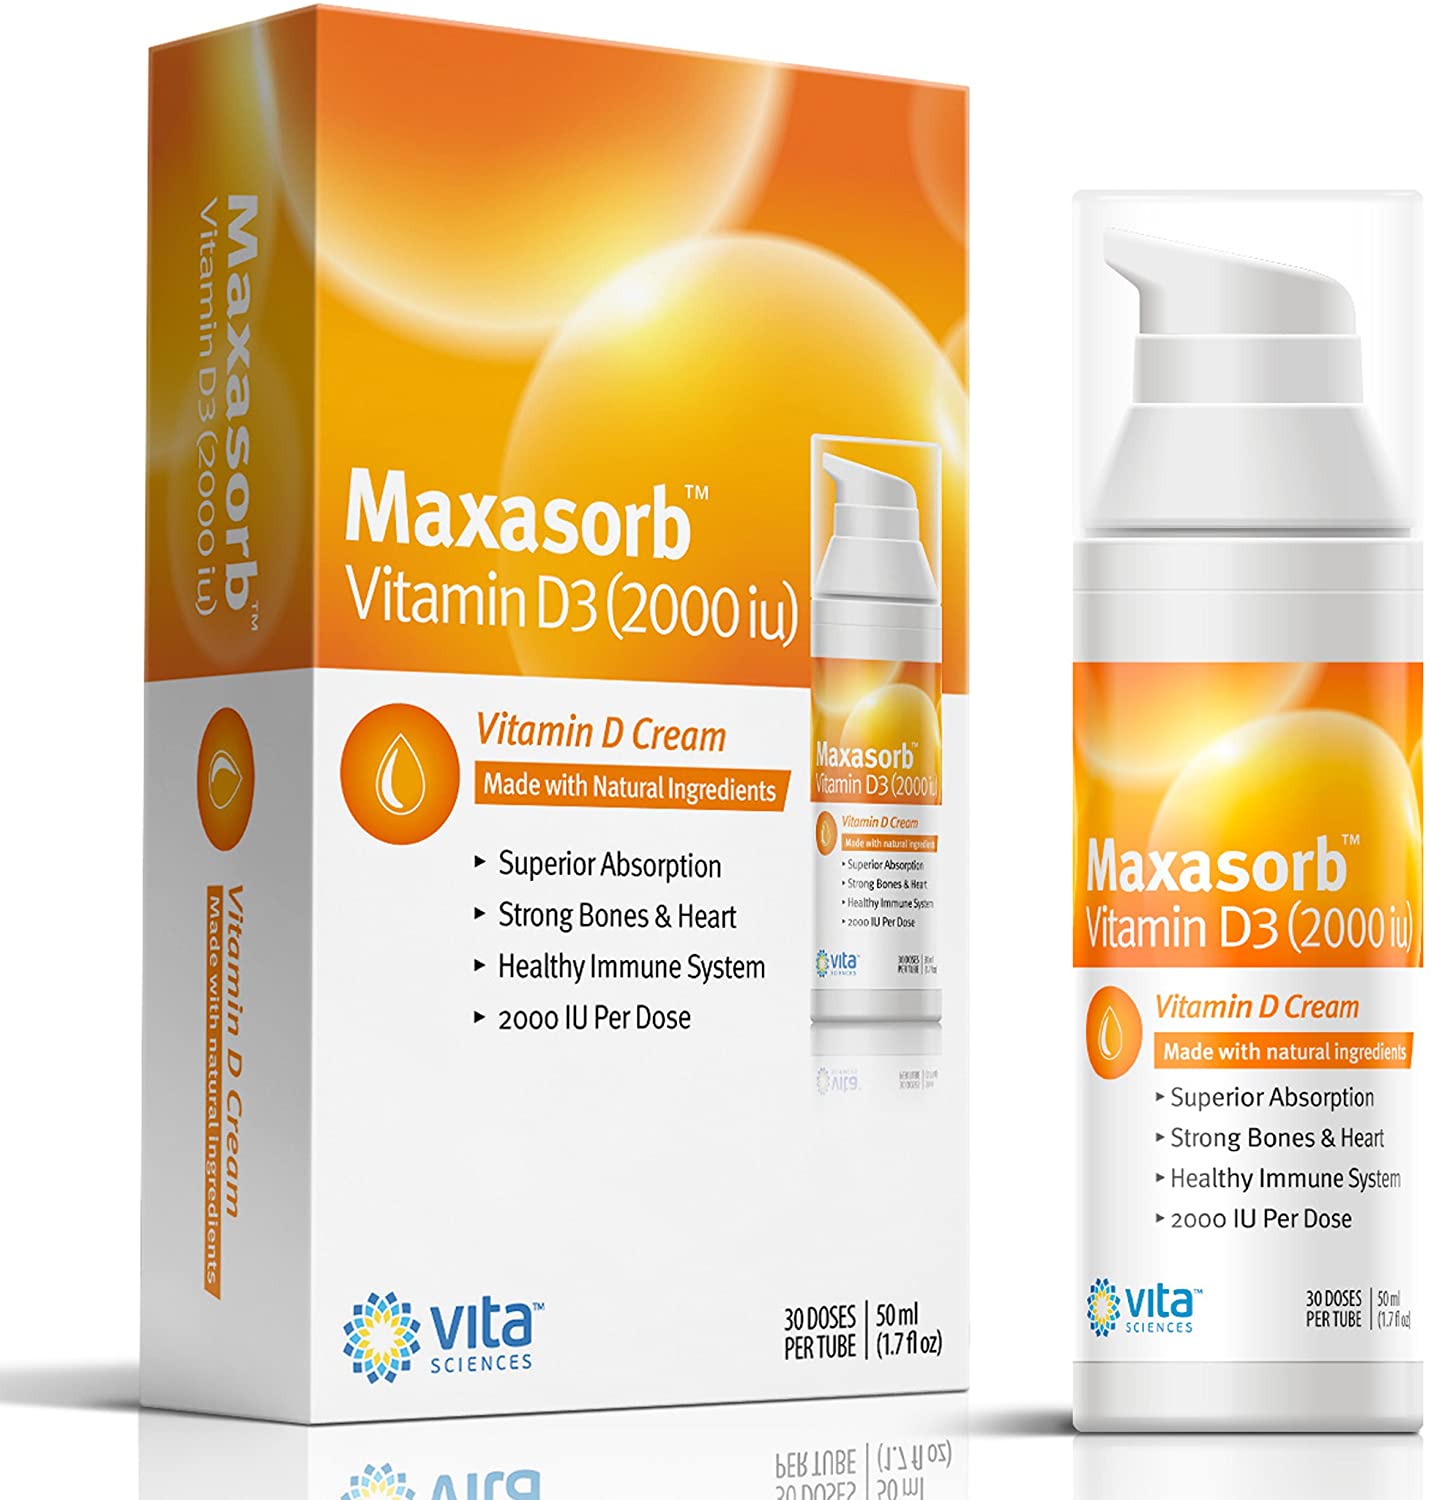 Vitamin D Cream Safe for Psoriasis Sufferers